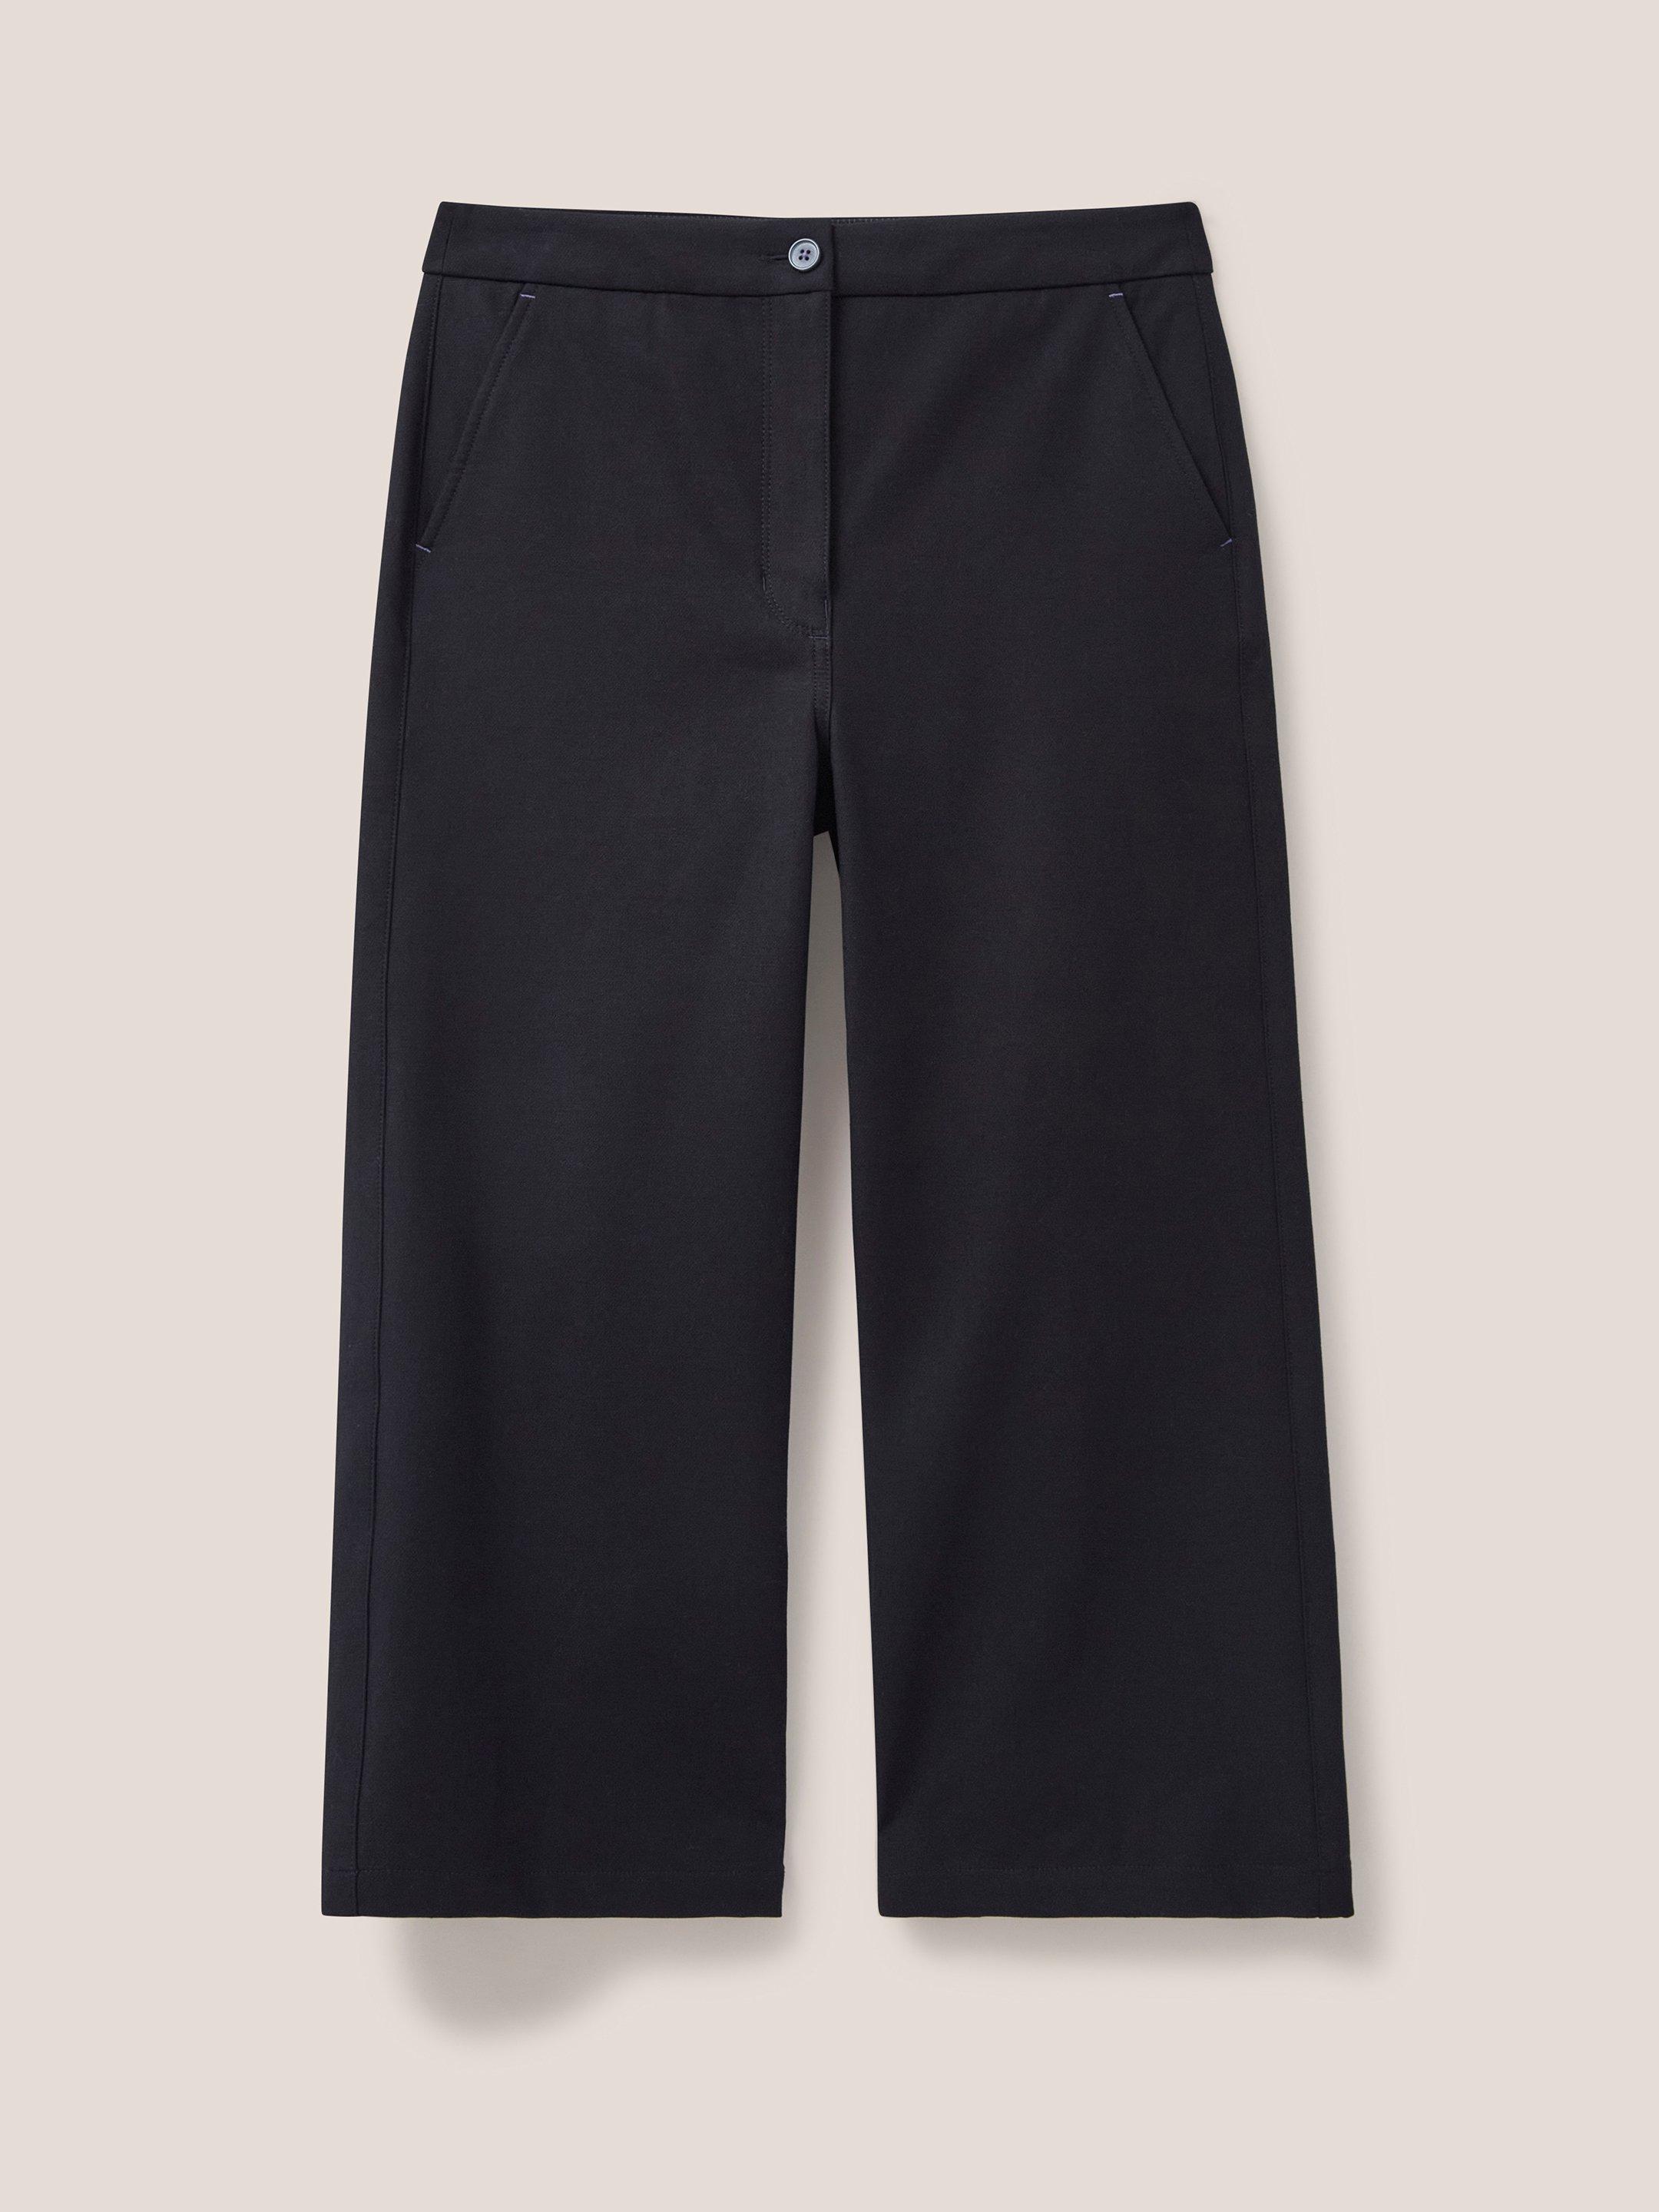 Belle Wide Leg Cropped Trouser in PURE BLK - FLAT FRONT